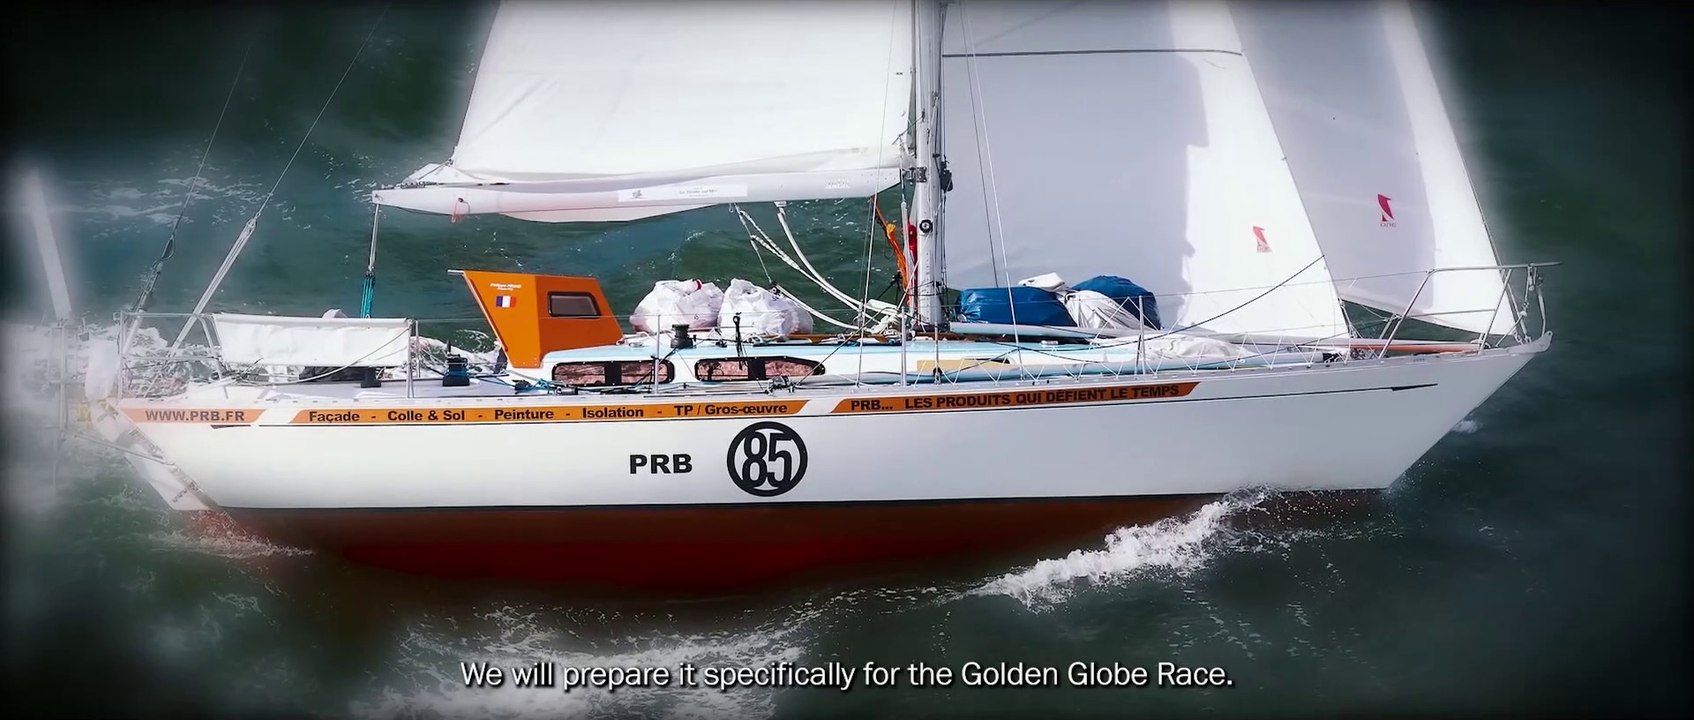 Golden Globe Race Official 2021 :DAMIEN GUILLOU AND PRB ENTER THE GOLDEN  GLOBE RACE 20210319 with English Subtitle - Vidéo Dailymotion